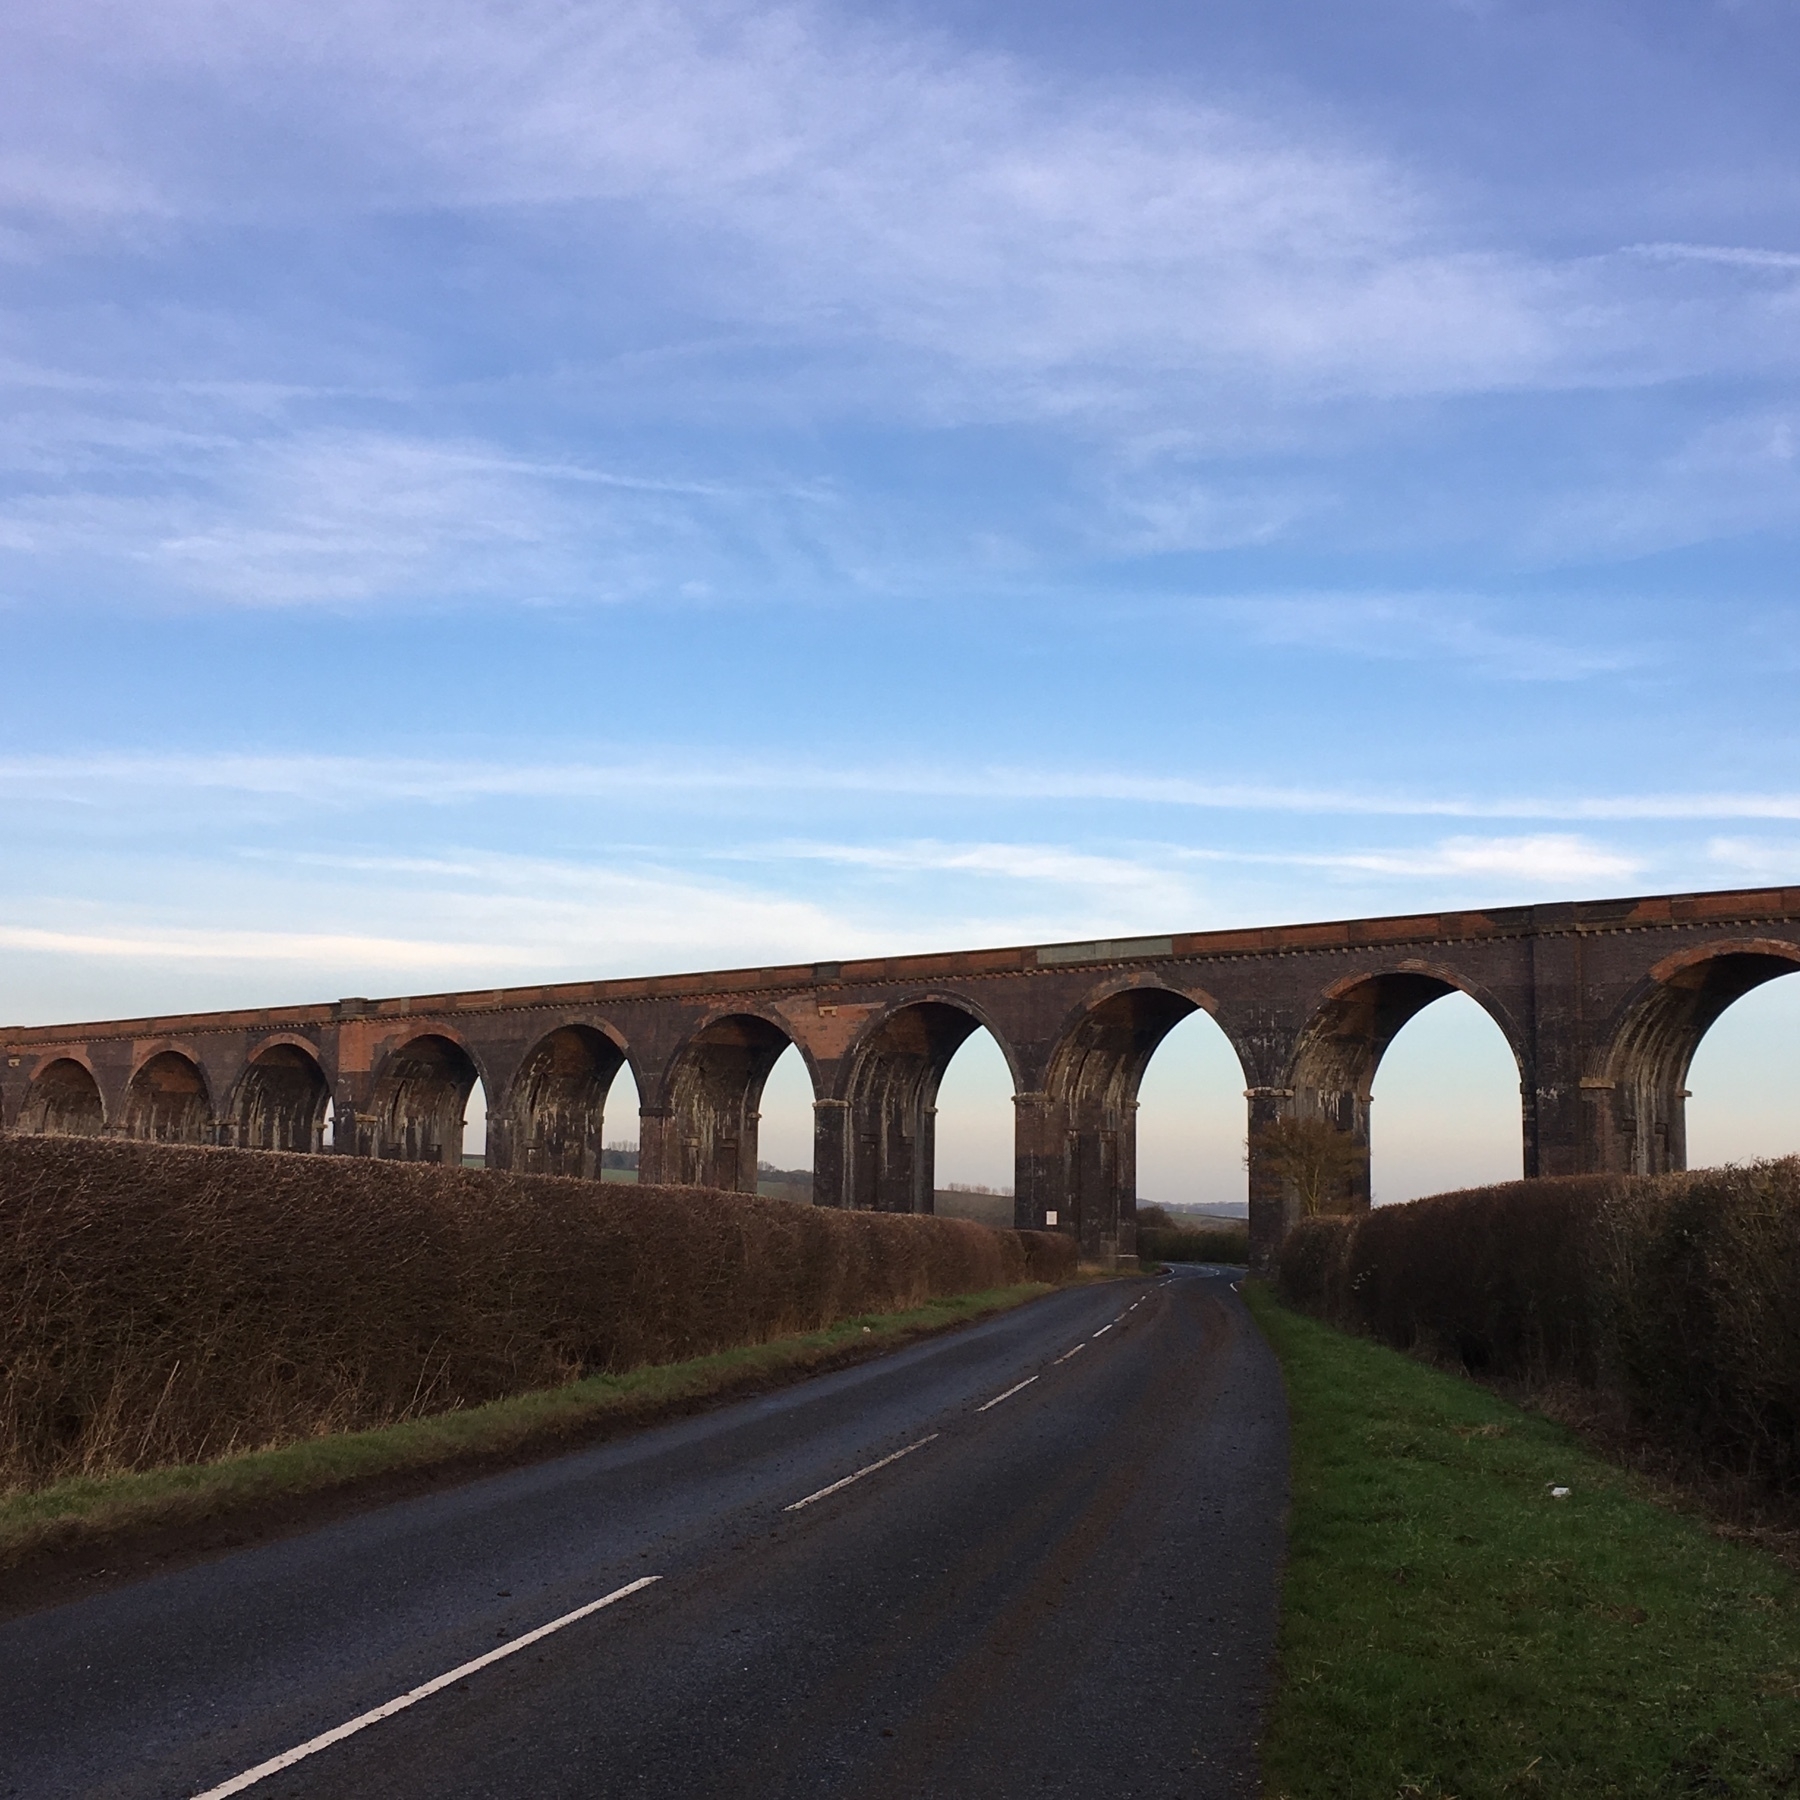 Viaduct crossing a country road